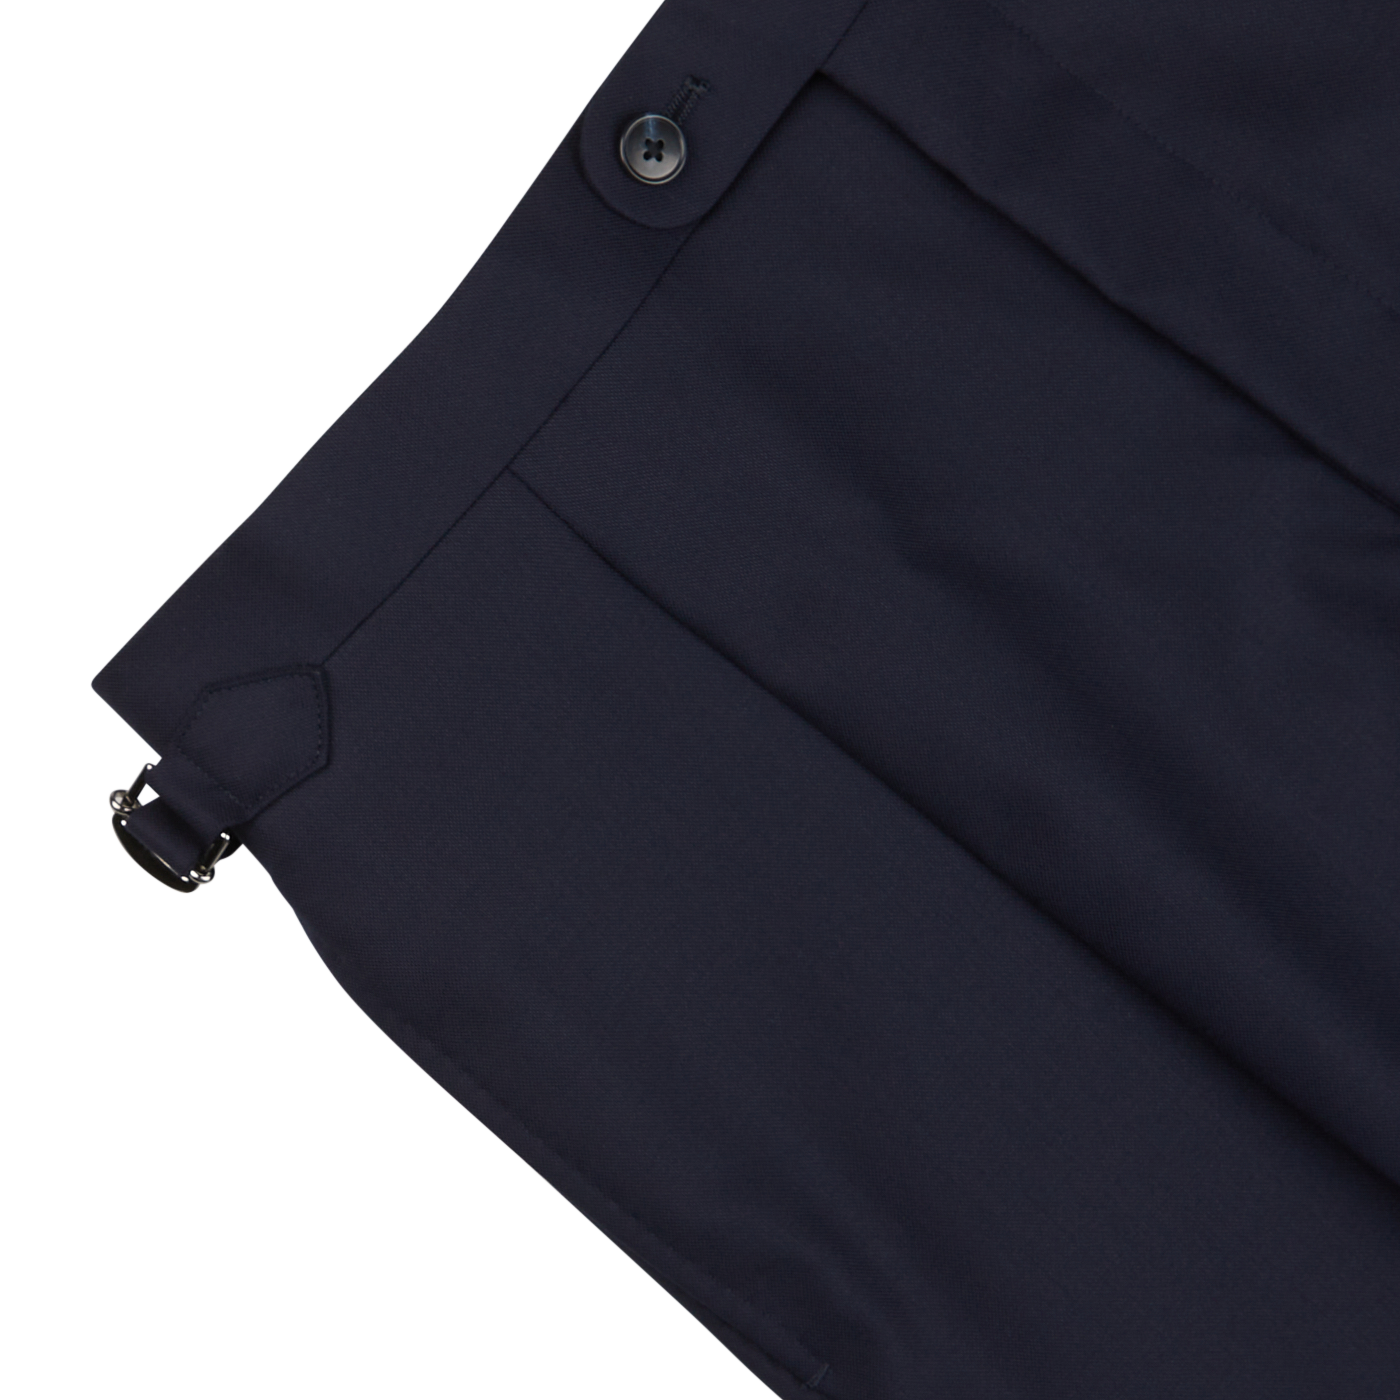 Close-up of a Baltzar Sartorial navy blue pleated skirt with a side button and a small buckle detail, crafted from super 100’s wool.